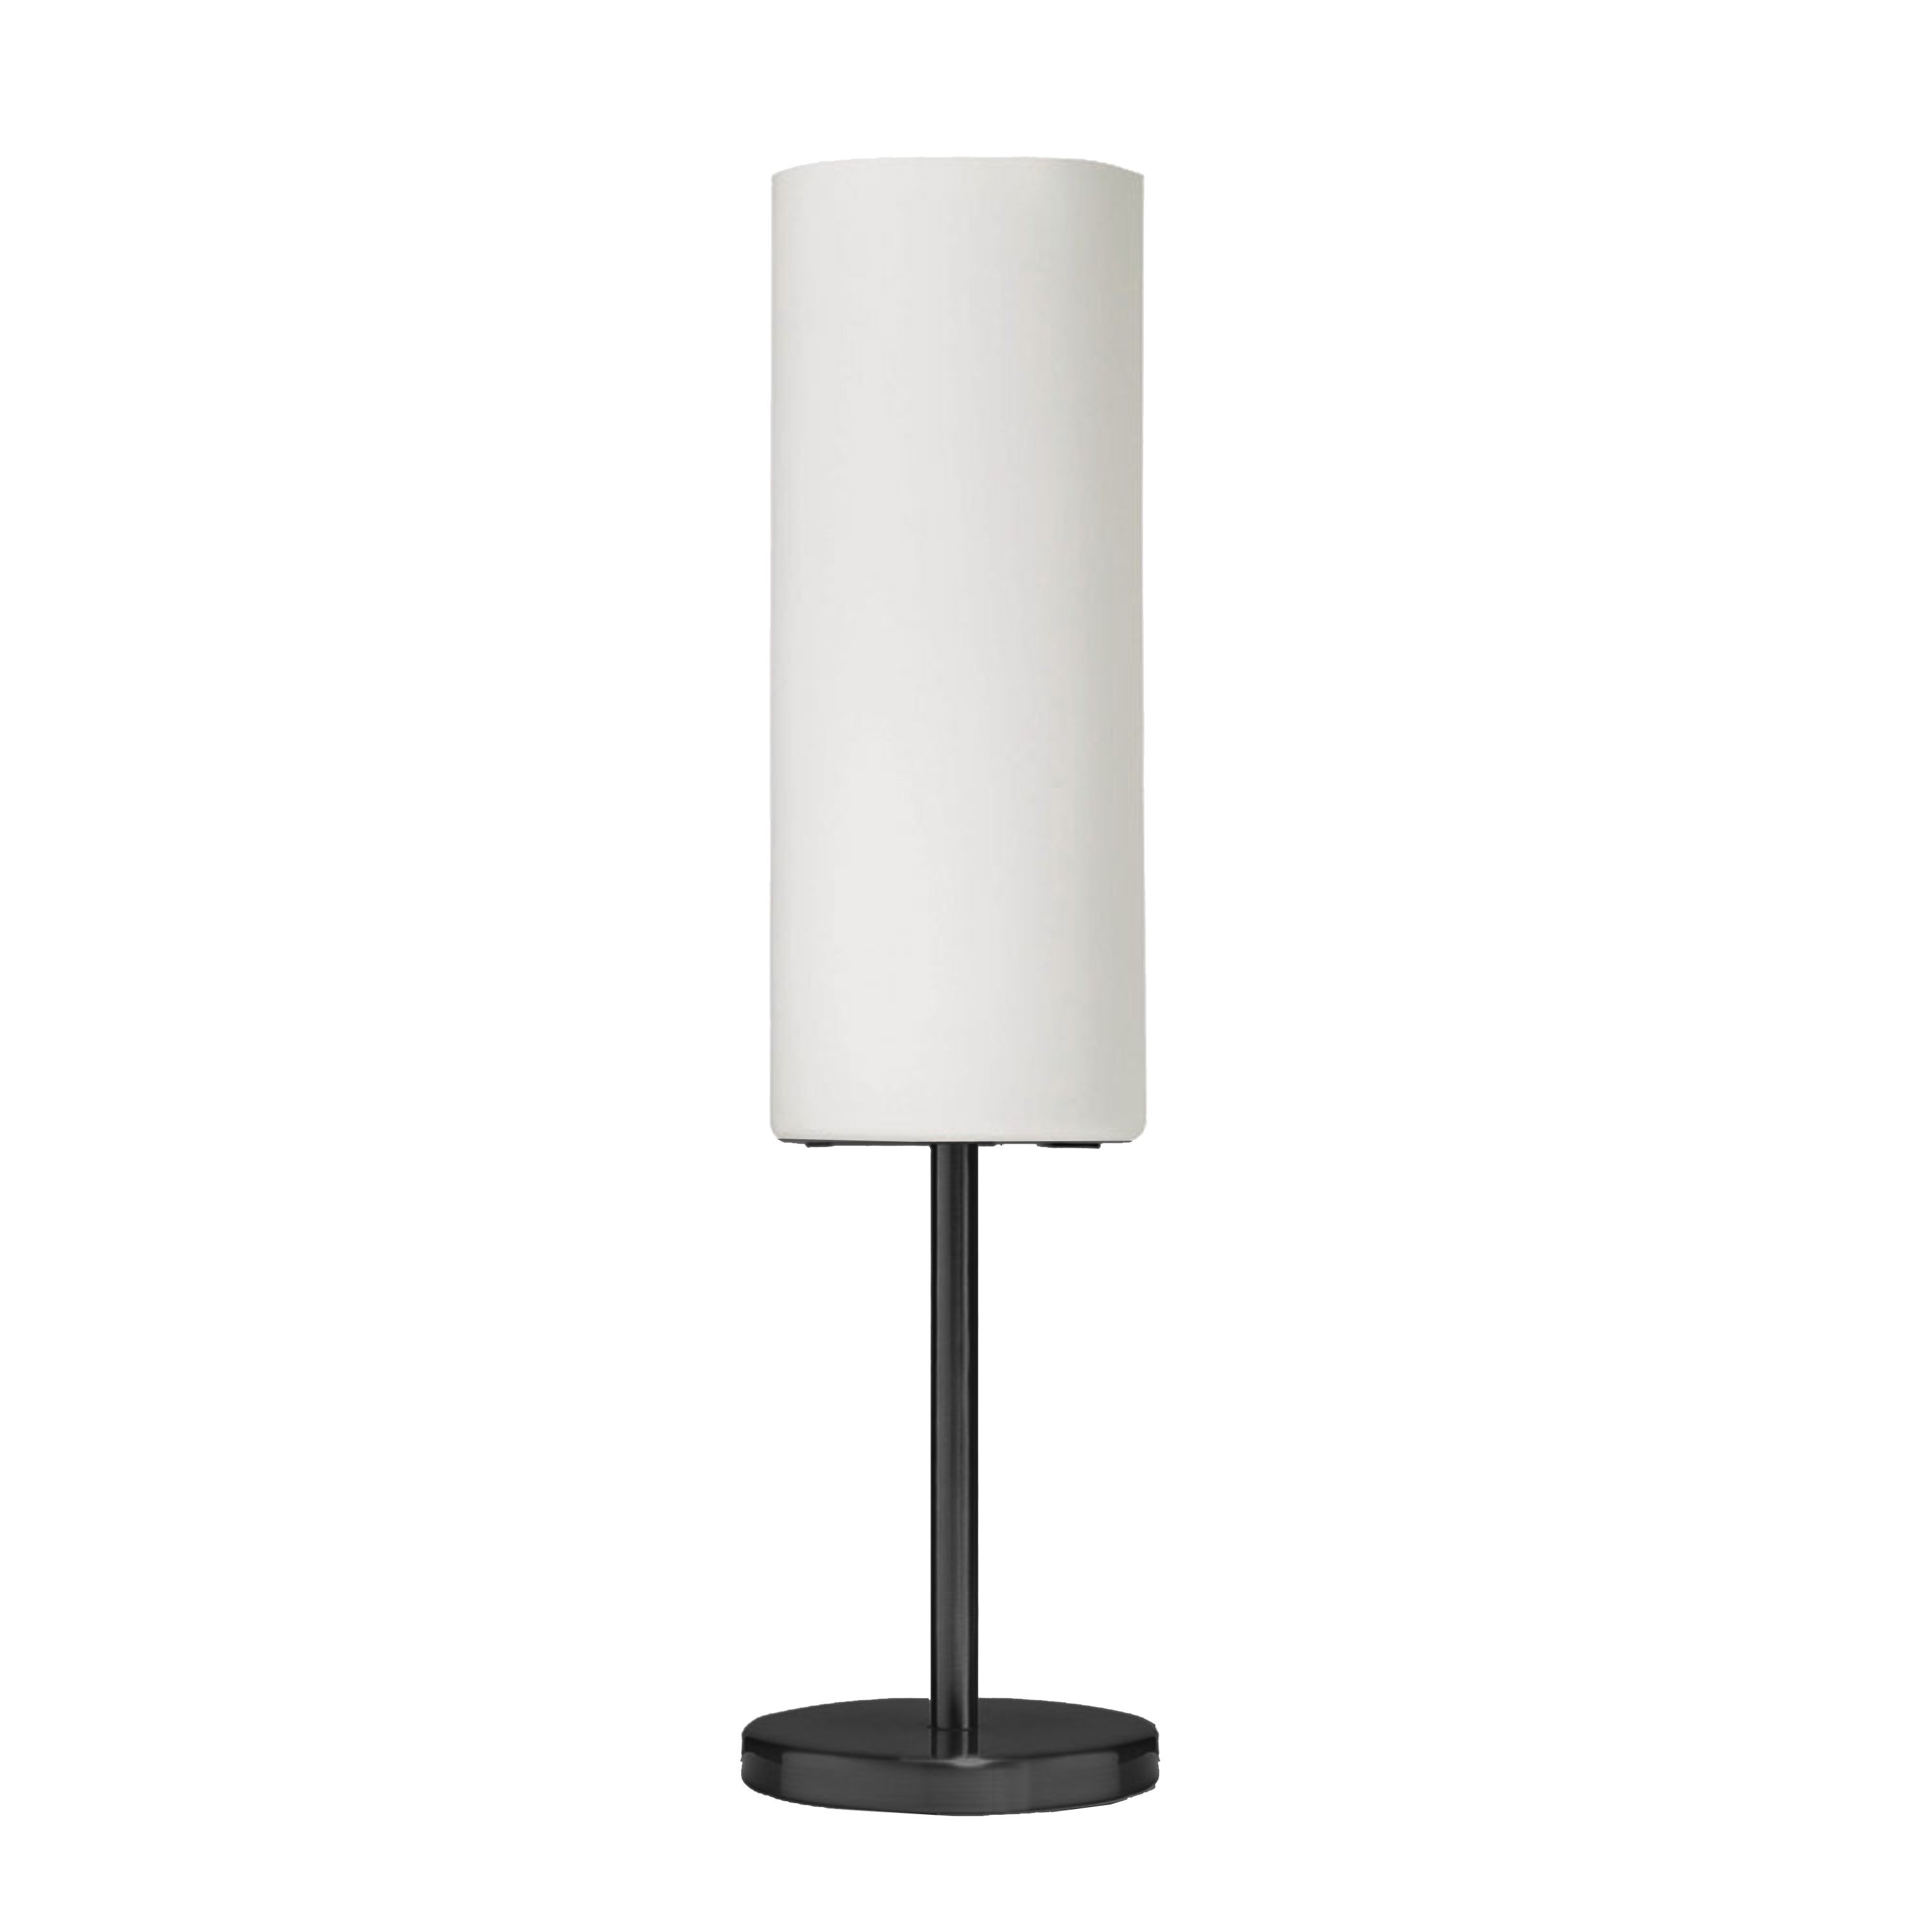 Stylish, with a no-nonsense modern profile, Paza lighting has a versatile appeal that will work with many décor schemes. It offers an unobtrusive silhouette that will enhance the furnishings around it. A straight metal frame comes in a choice of finishes that contrast with the white cylindrical glass housing. It's a simple look that creates skin-friendly light with understated flair in both table and ceiling mounted configurations. With its modest footprint, it's suitable for kitchens and hallways of all sizes, or as an accent lamp in any room.